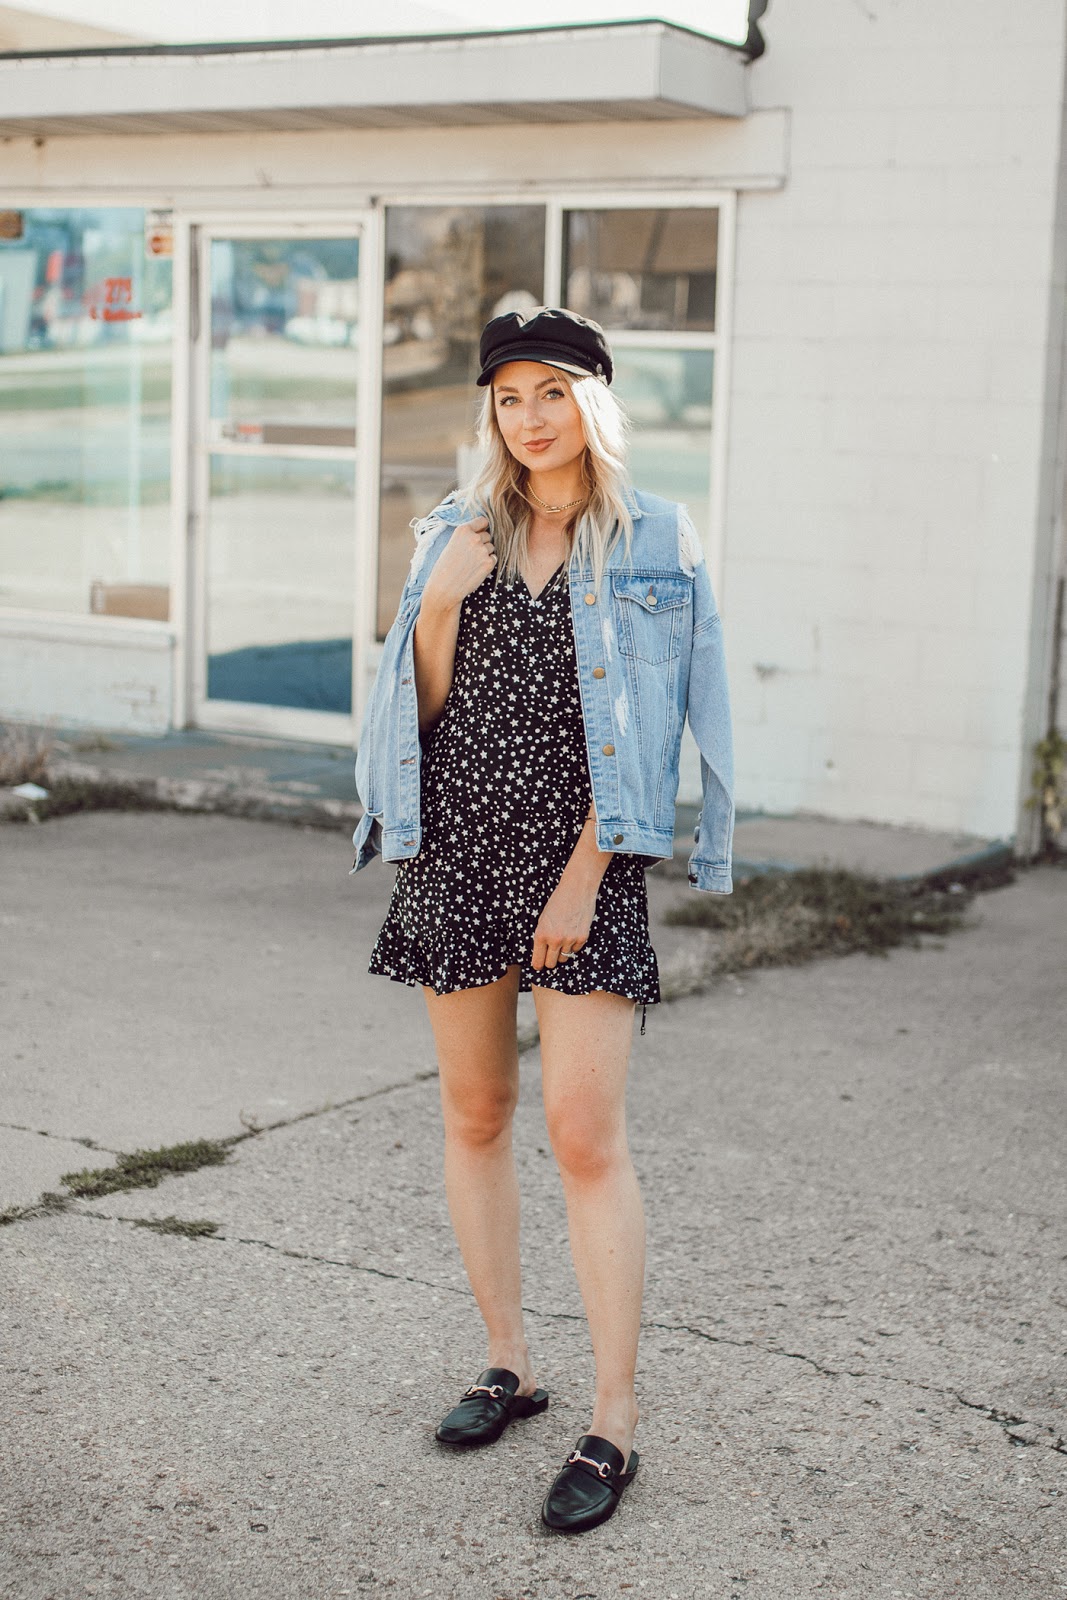 wrap dress styled for fall w/ a denim jacket, captain's cap and loafers